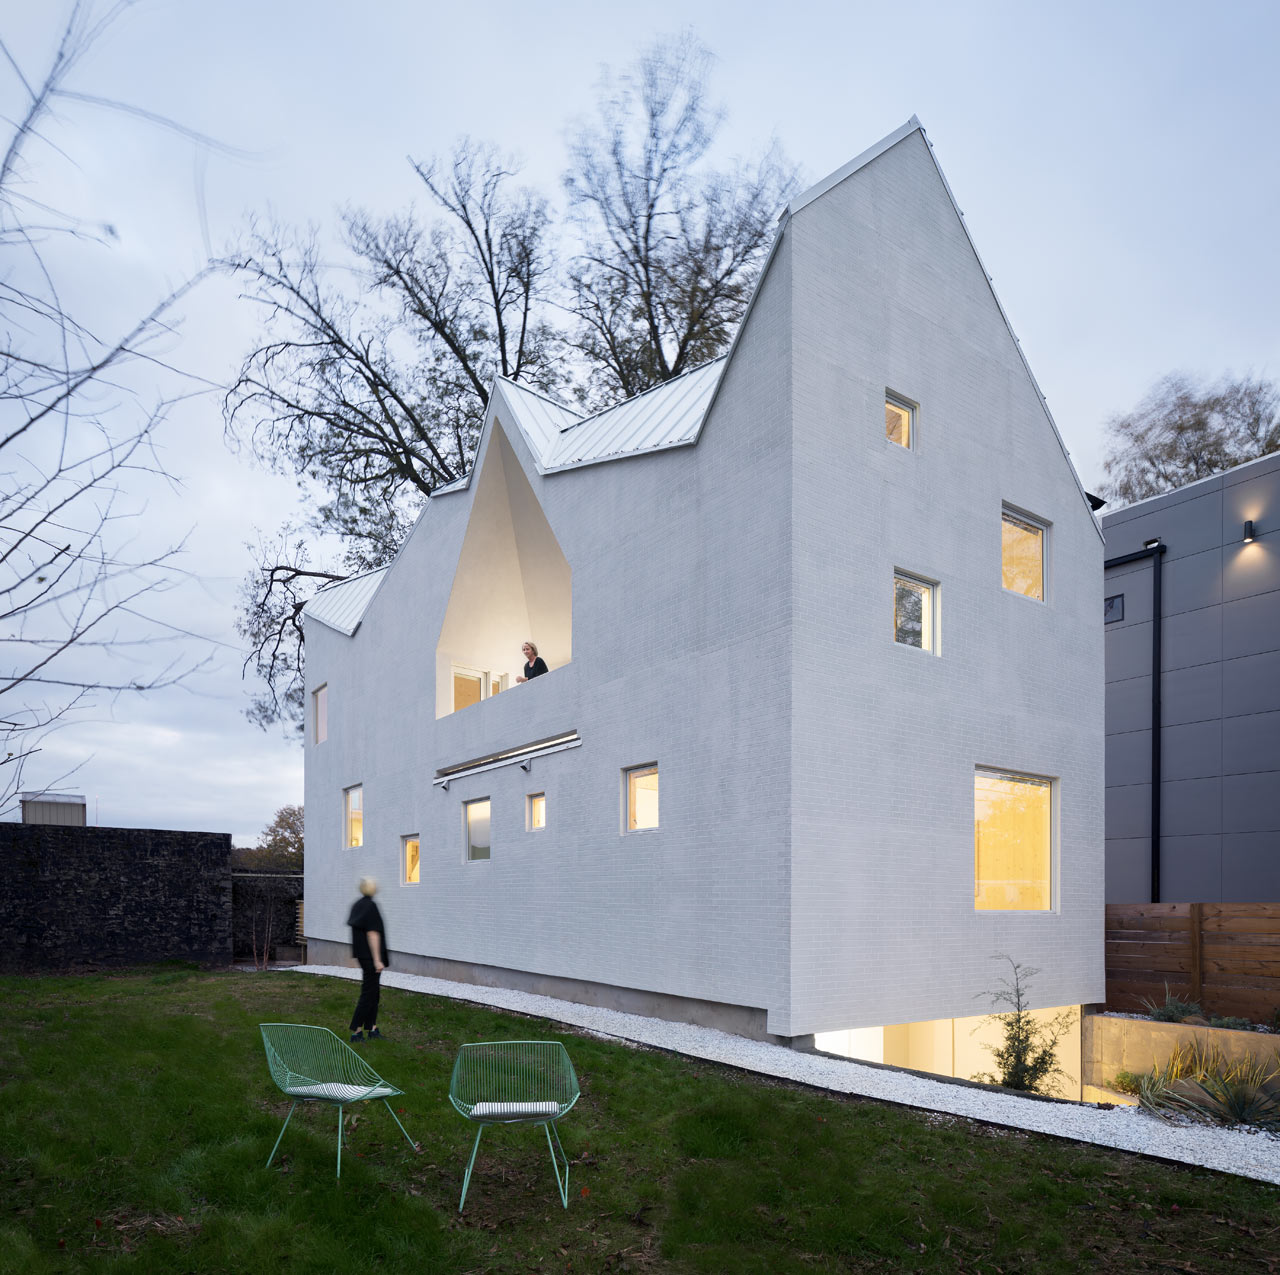 Haus Gables Takes an New Approach with its Unique Gabled Roof